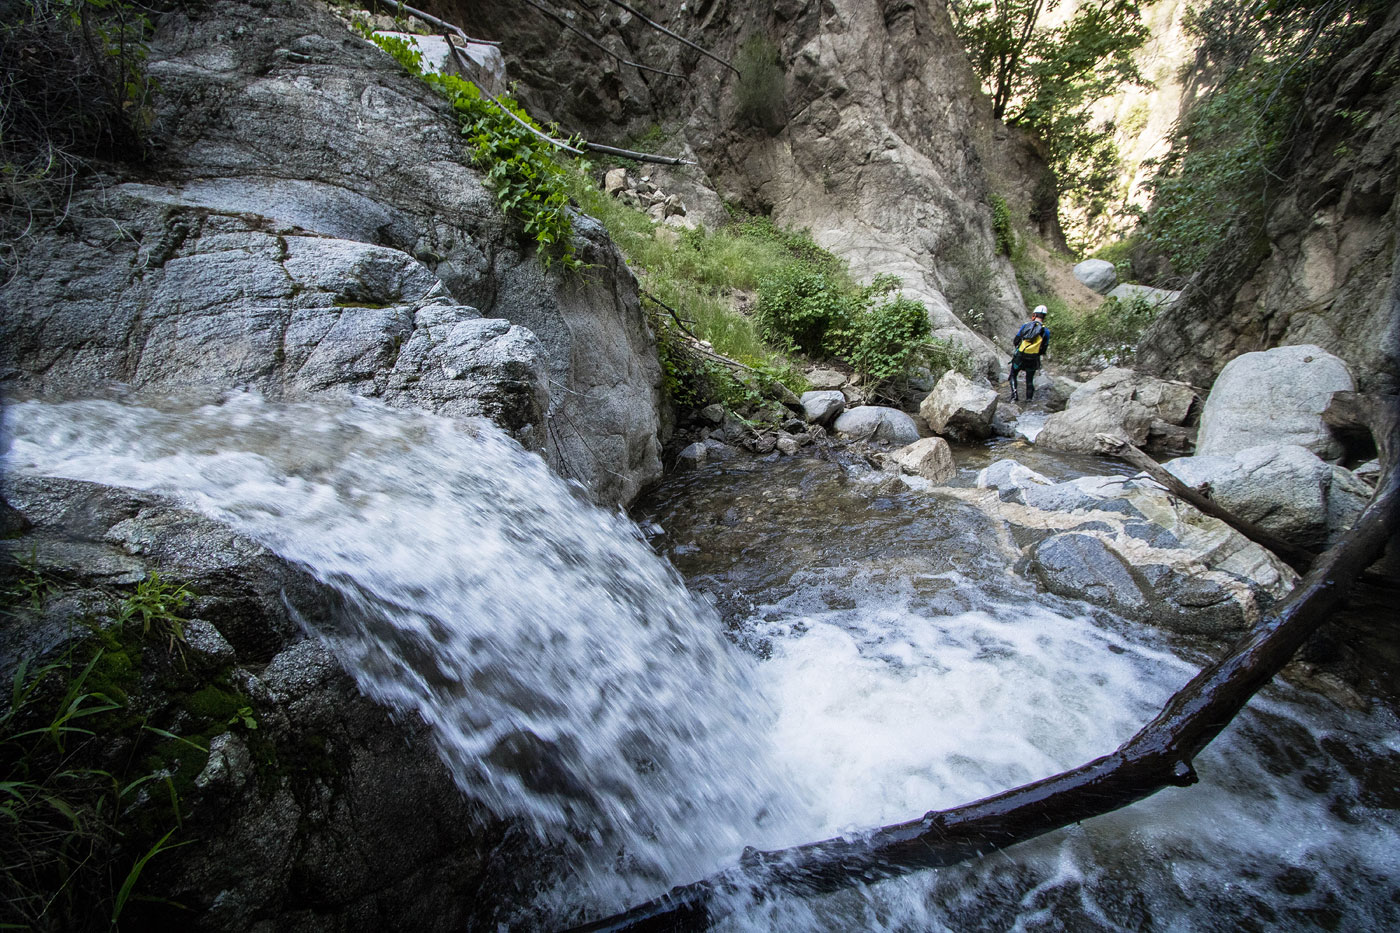 Canyoneer Little Santa Anita Canyon in Angeles National Forest, California - Stav is Lost